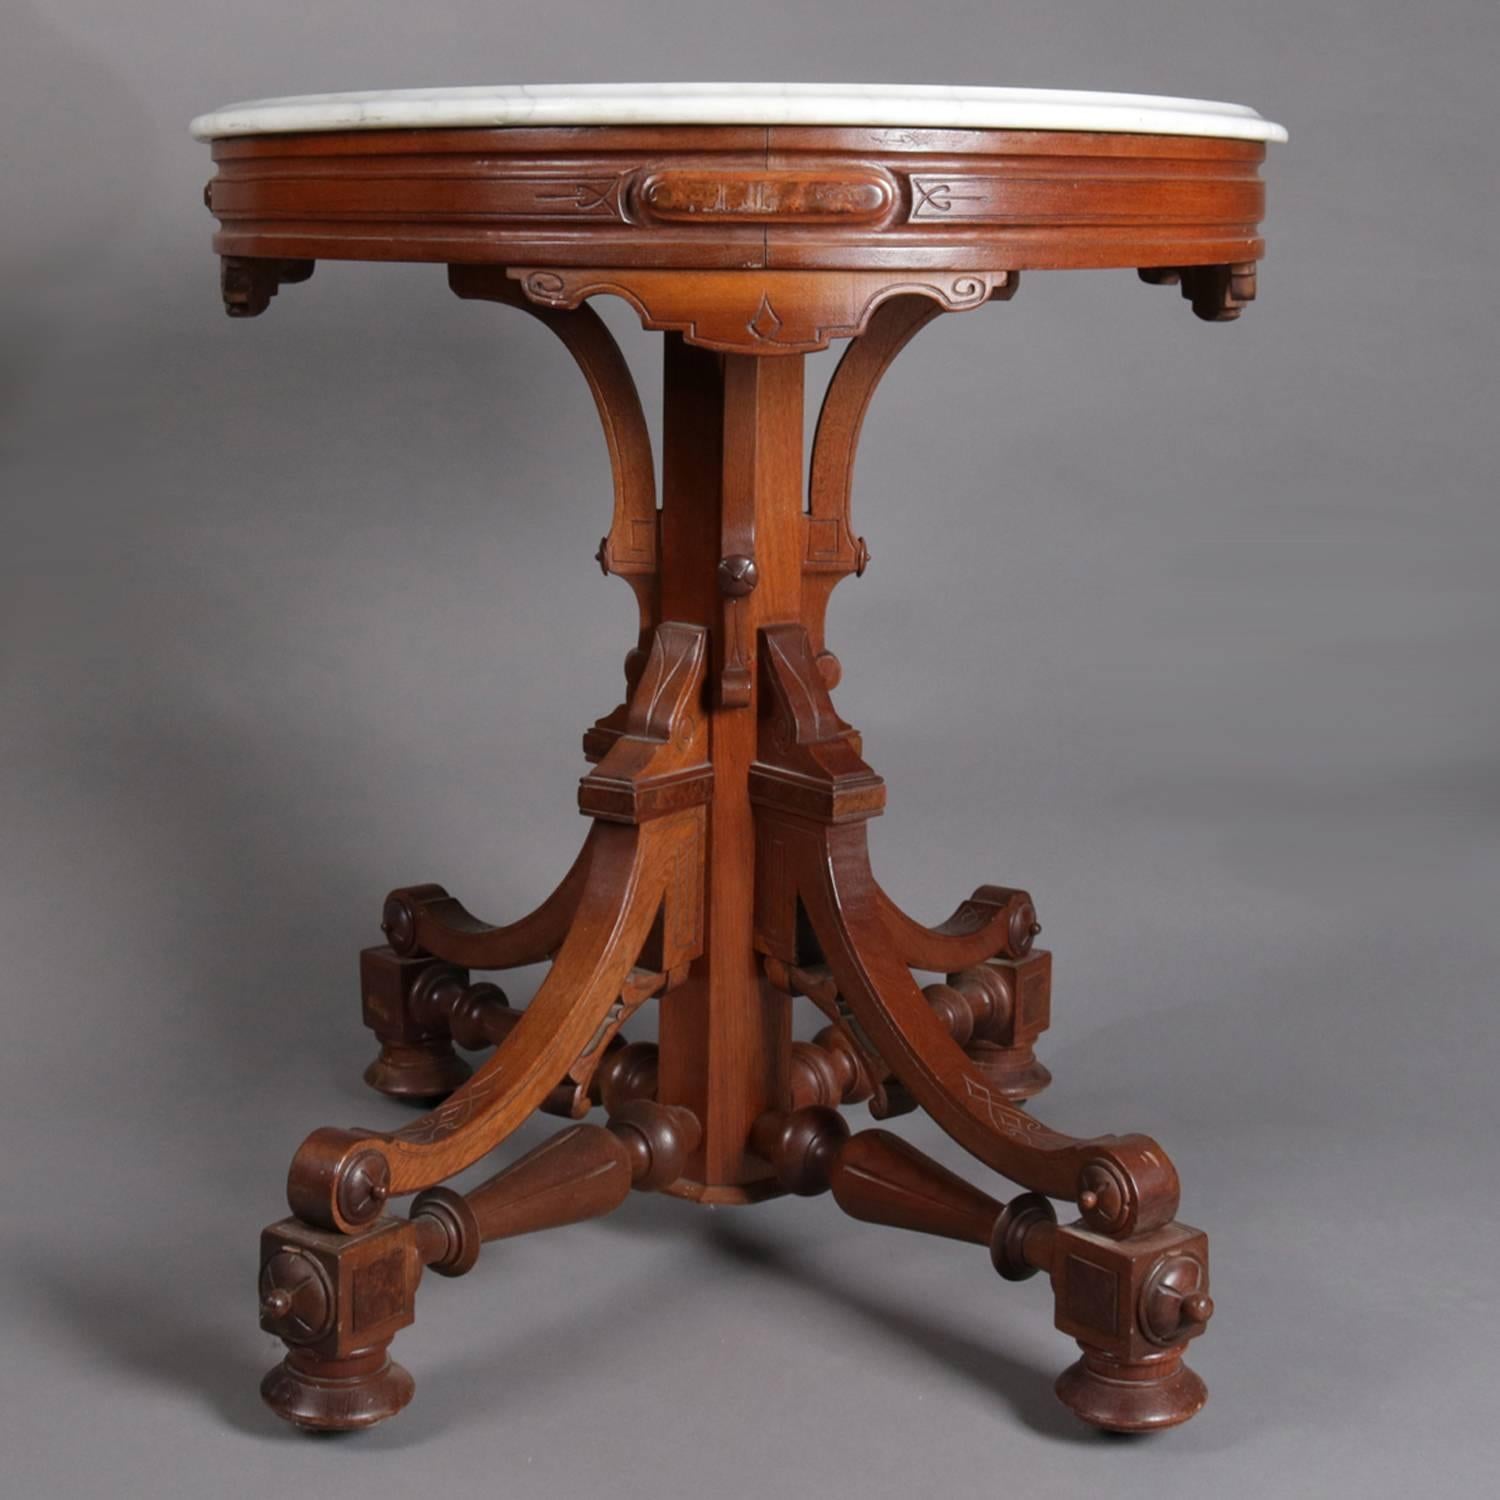 19th Century Antique Victorian Eastlake Carved Walnut & Marble Pedestal Parlor Table